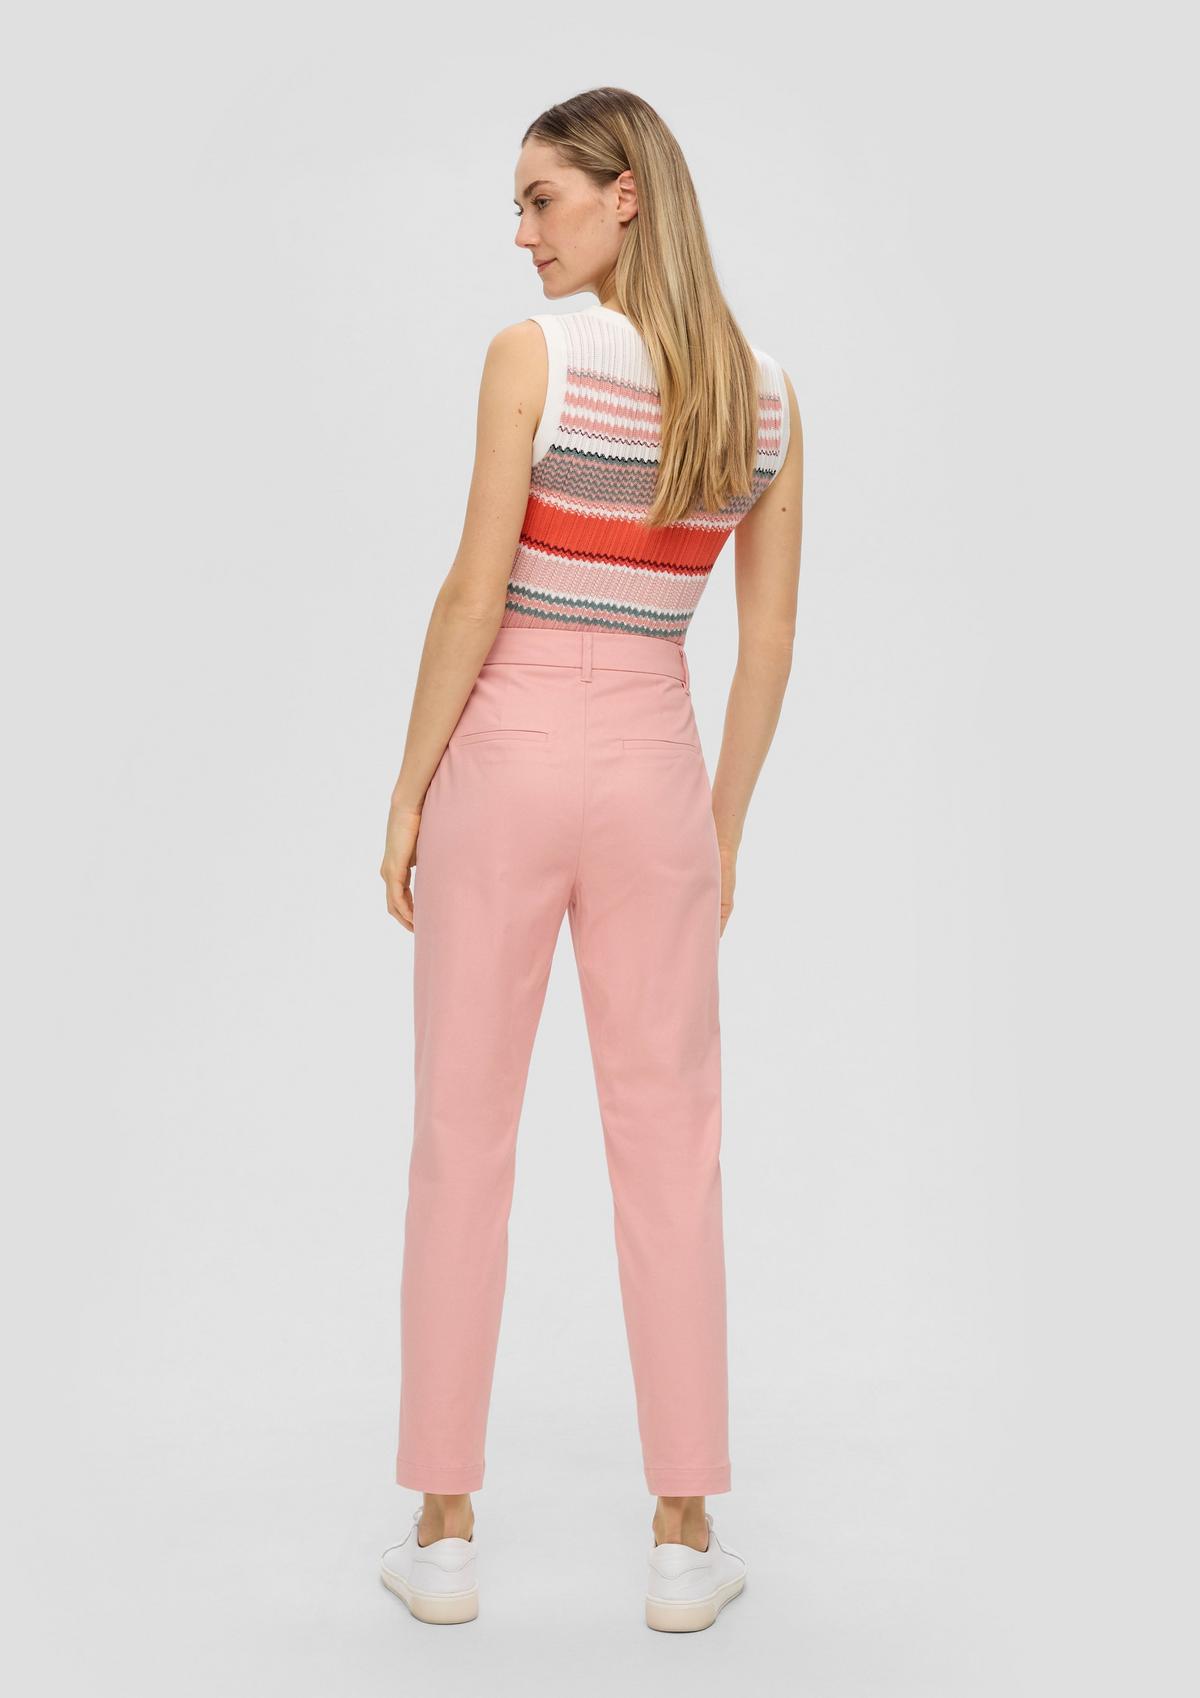 s.Oliver Stretch trousers with a tapered leg